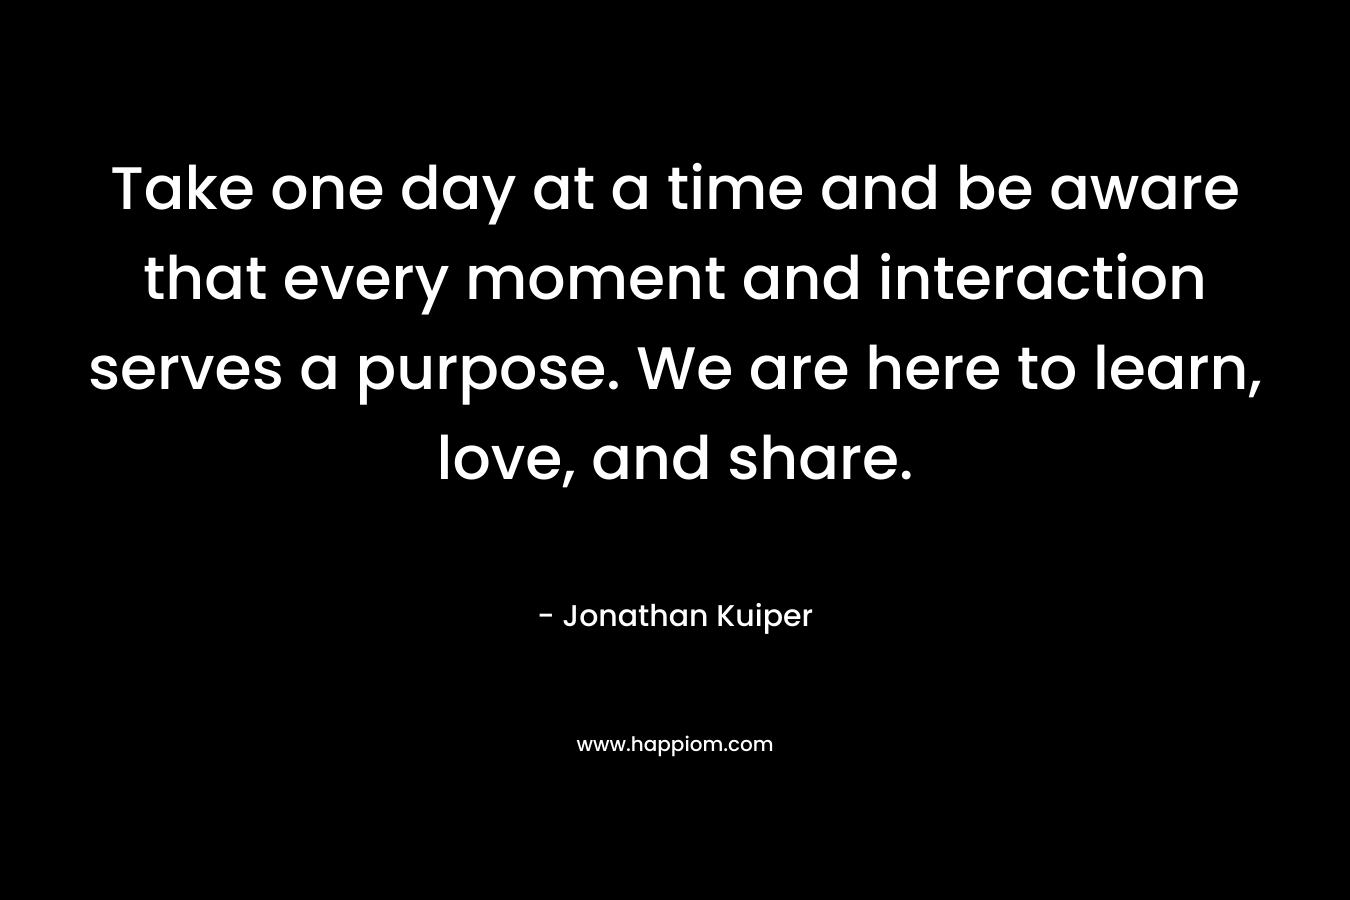 Take one day at a time and be aware that every moment and interaction serves a purpose. We are here to learn, love, and share. – Jonathan Kuiper